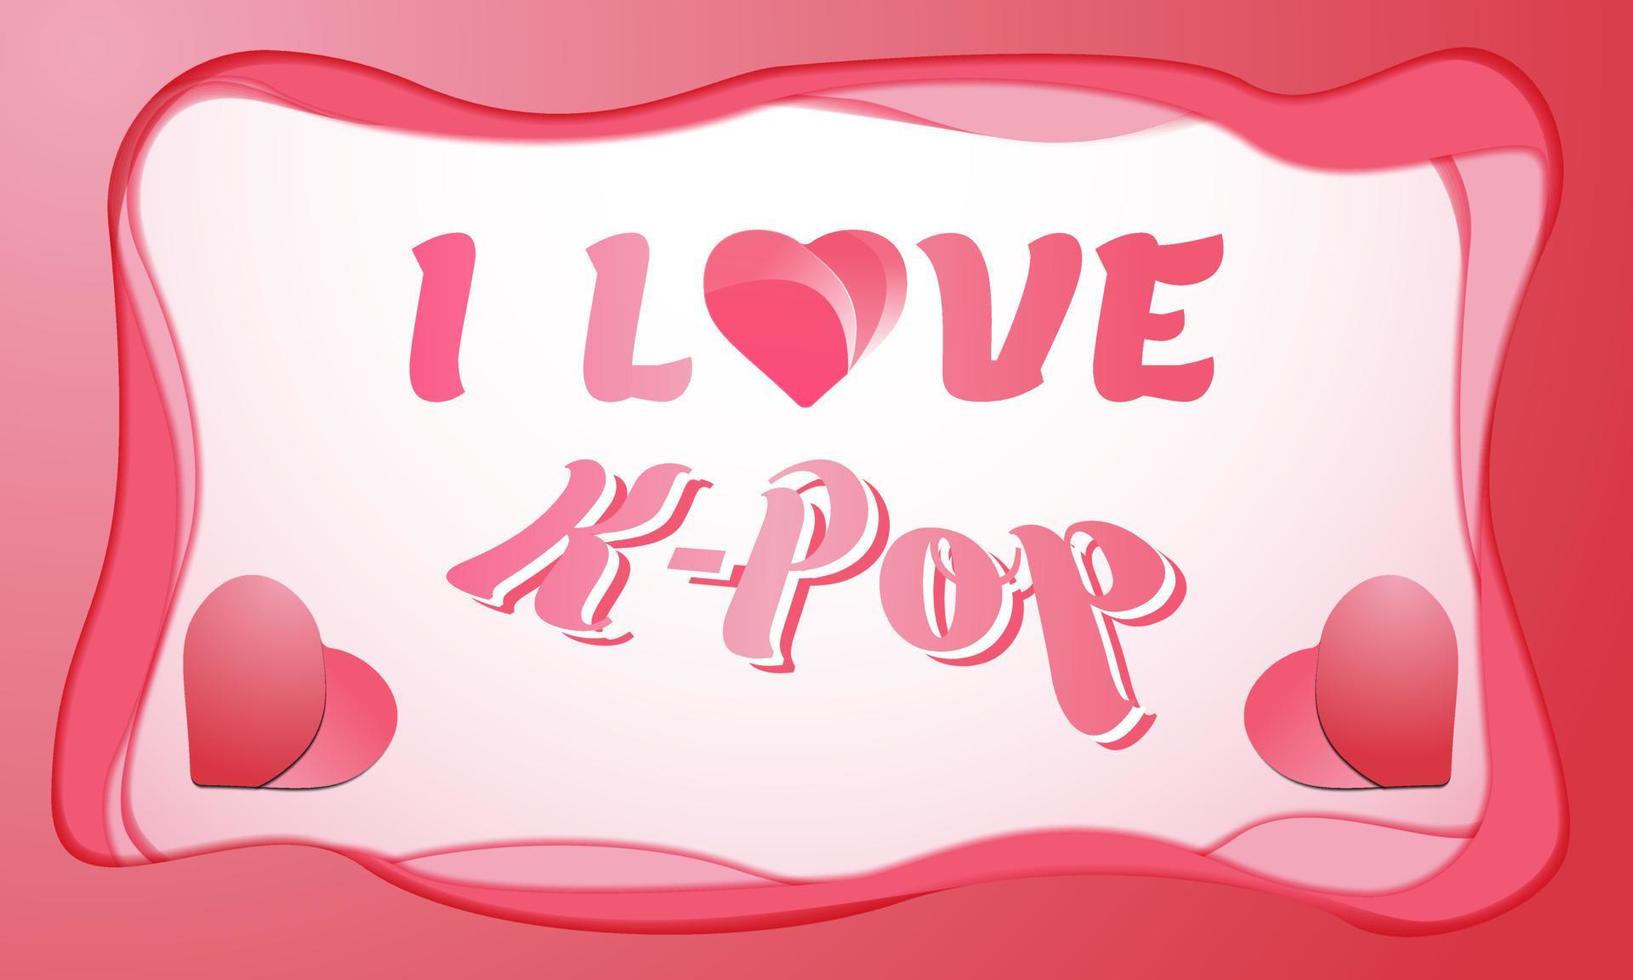 I Love K Pop Background. Korean Pop. Colorful greeting card, letter, banner, or poster. With heart icon. Premium and luxury vector illustration